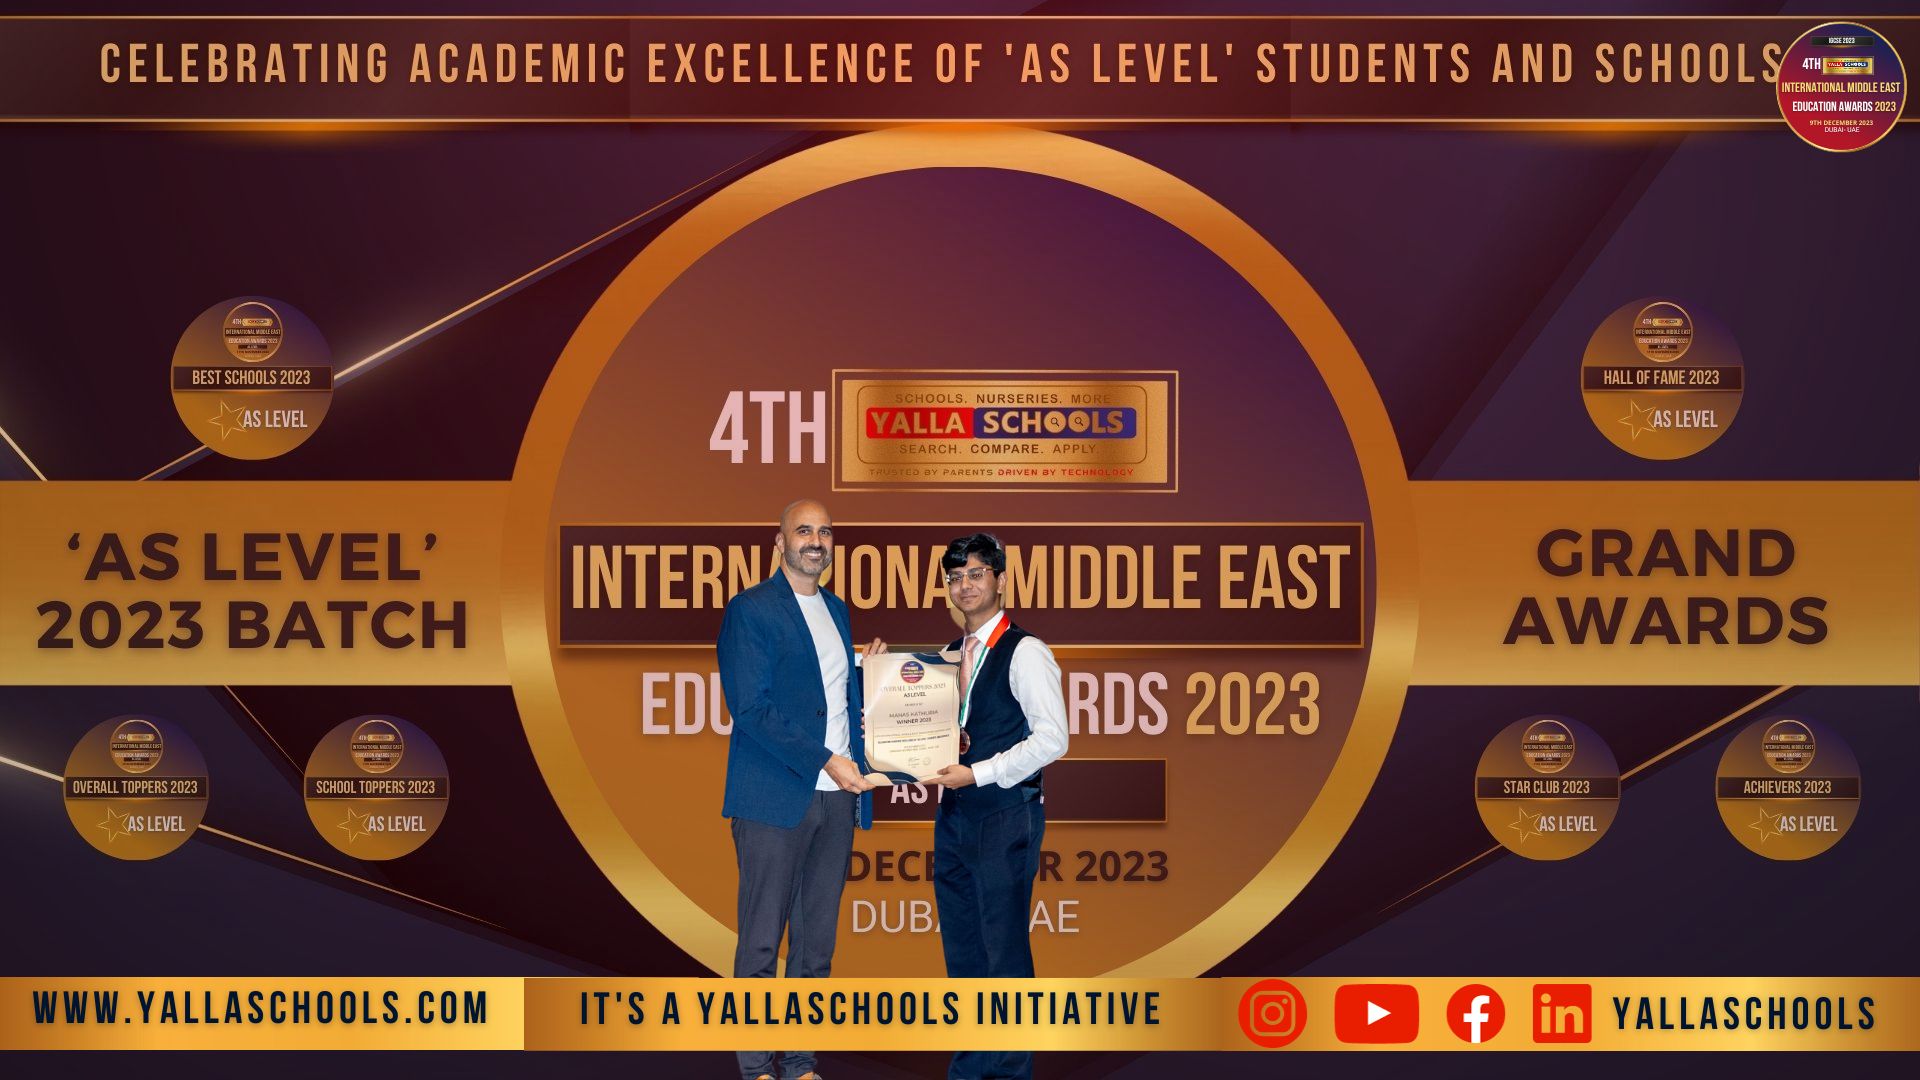 4th_International_Middle_East_Education_Grand_Awards_2023_(AS_LEVEL)